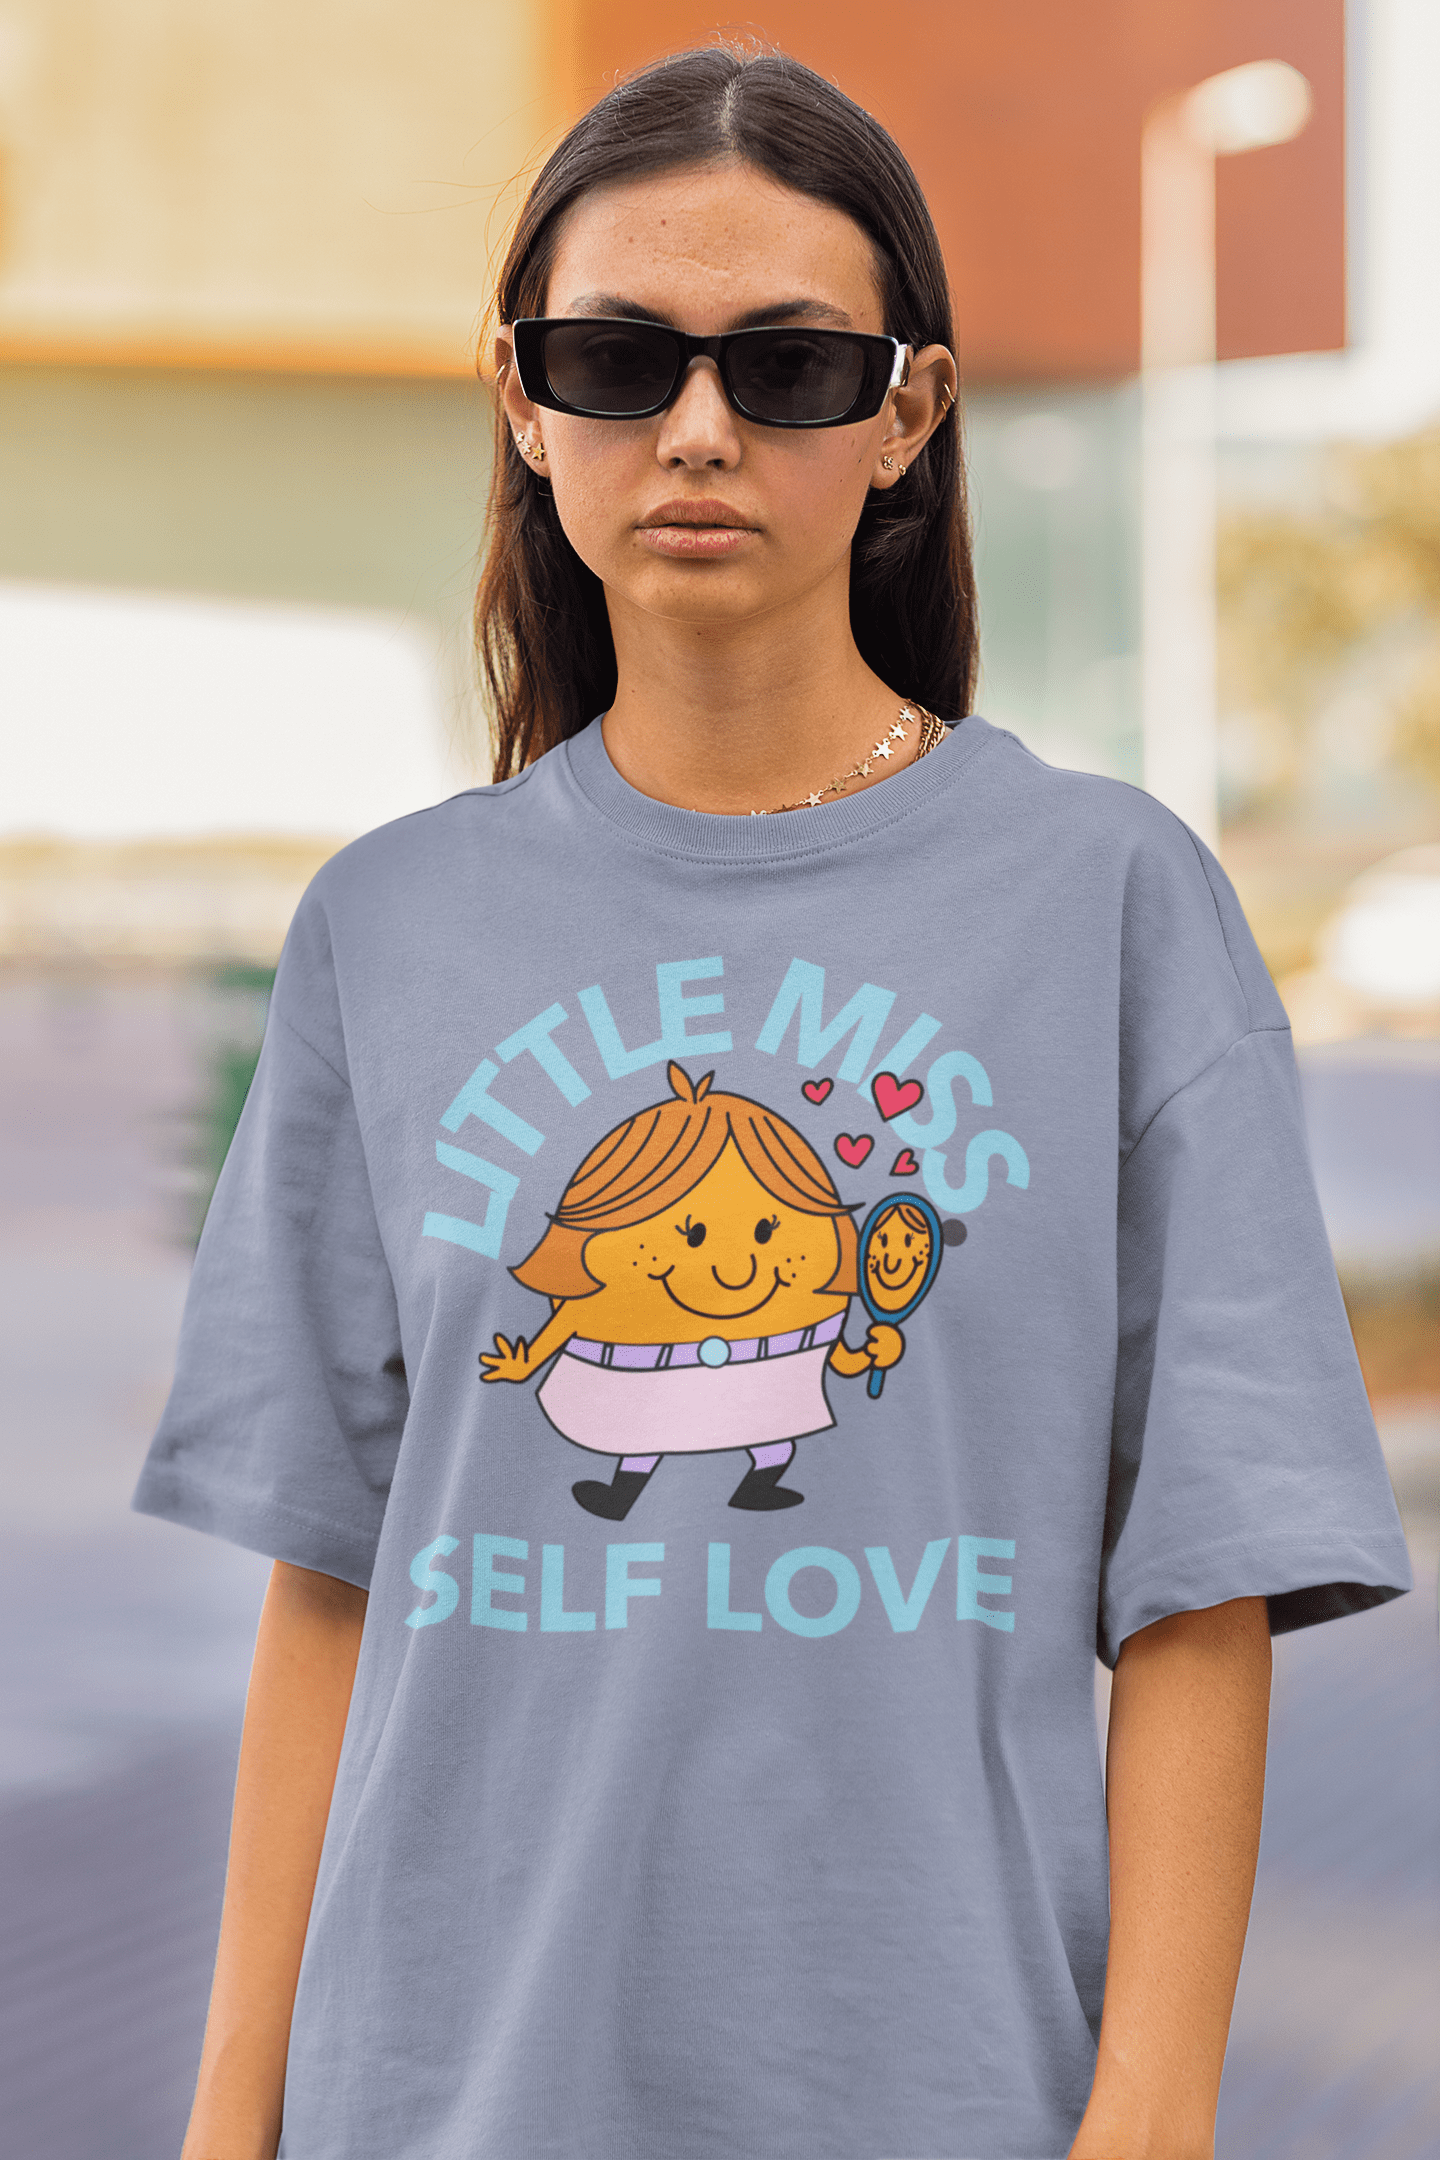 This is The Remix T-shirt LITTLE MISS: SELF LOVE - Unisex Crew Neck T-Shirt in Dust Purple